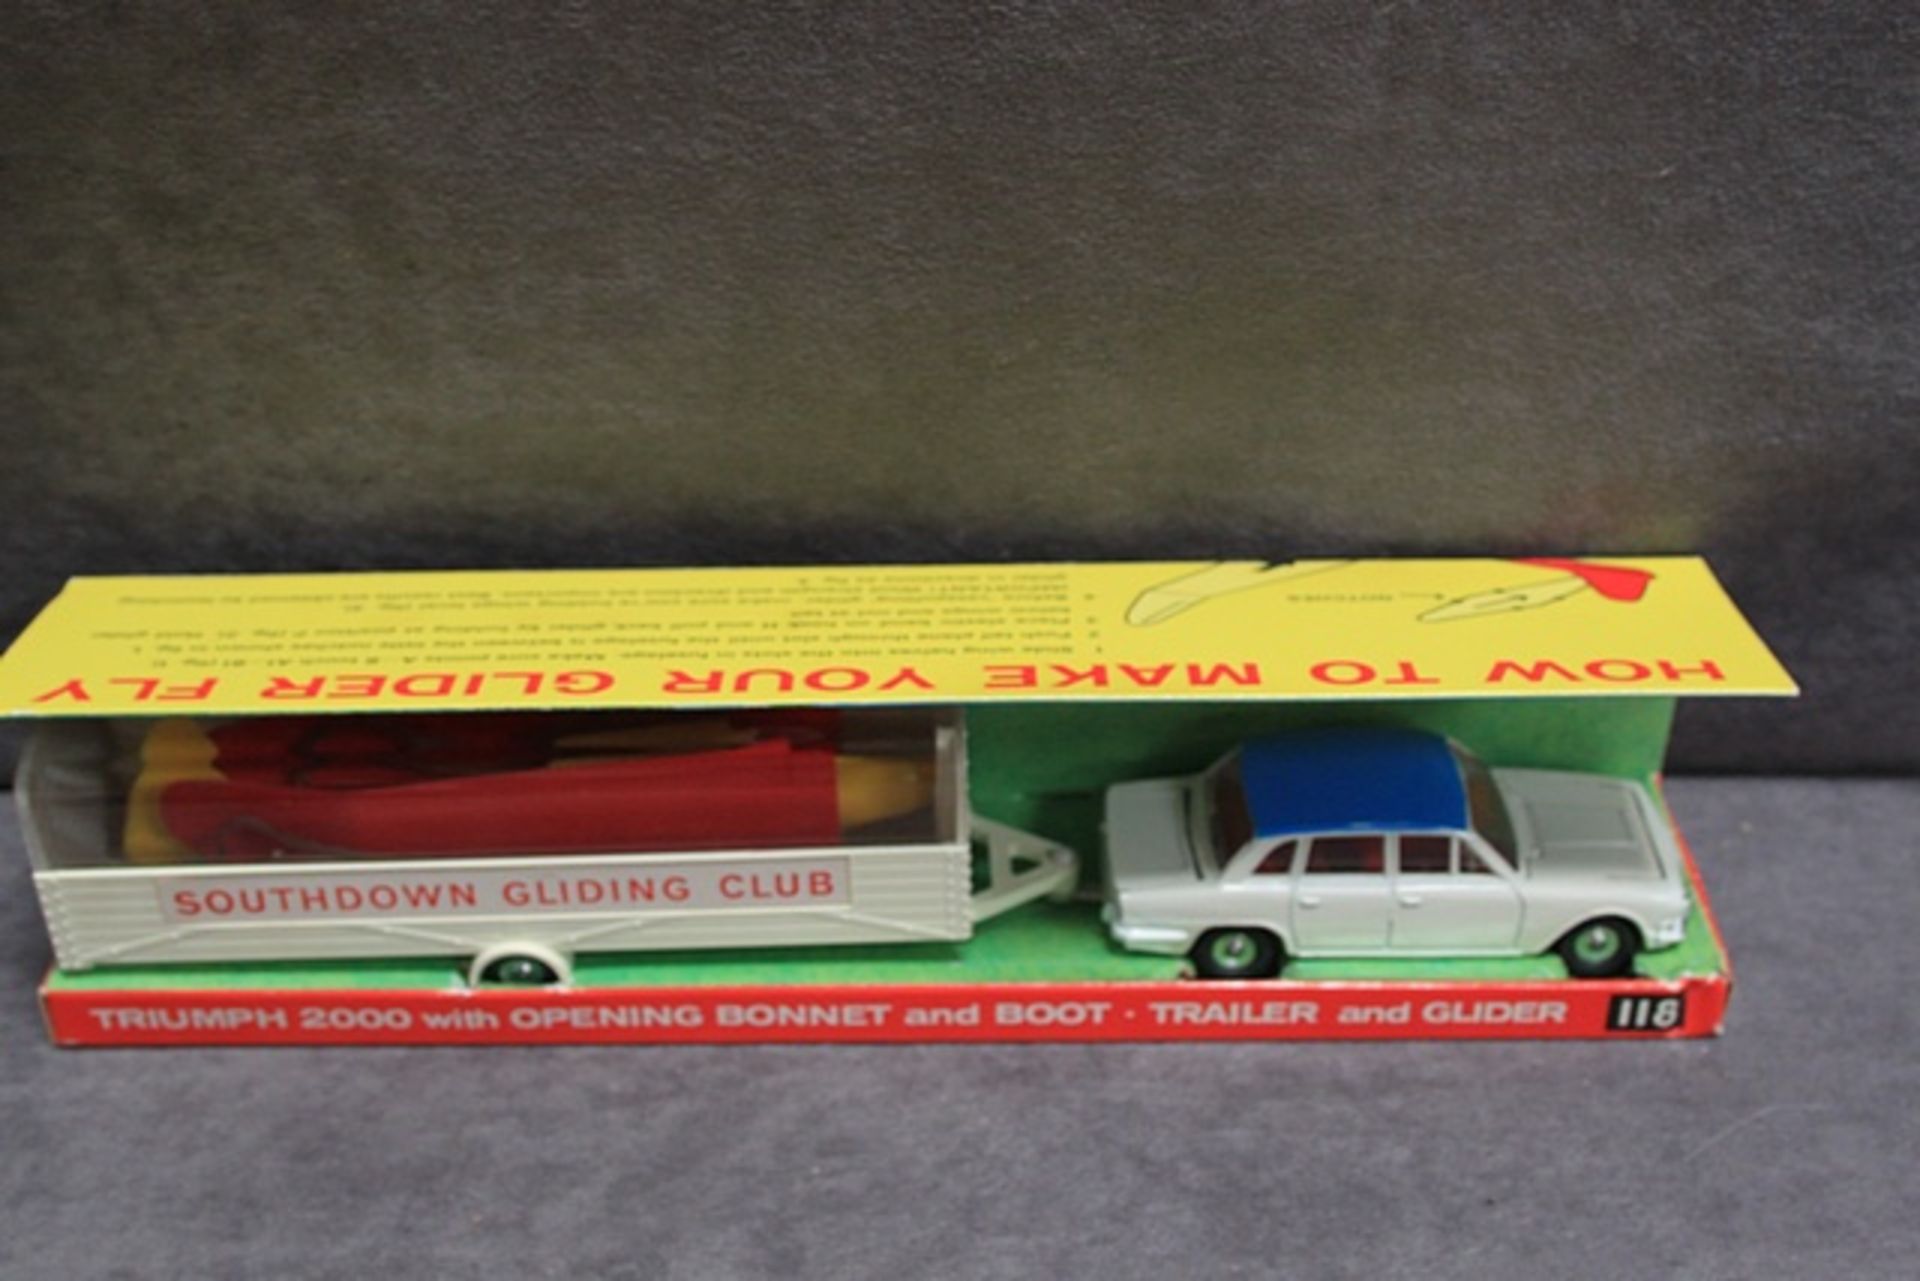 Quite Rare Mint Dinky Diecast Toys #118 Tow Away Glider Set with inner packaging in excellent box